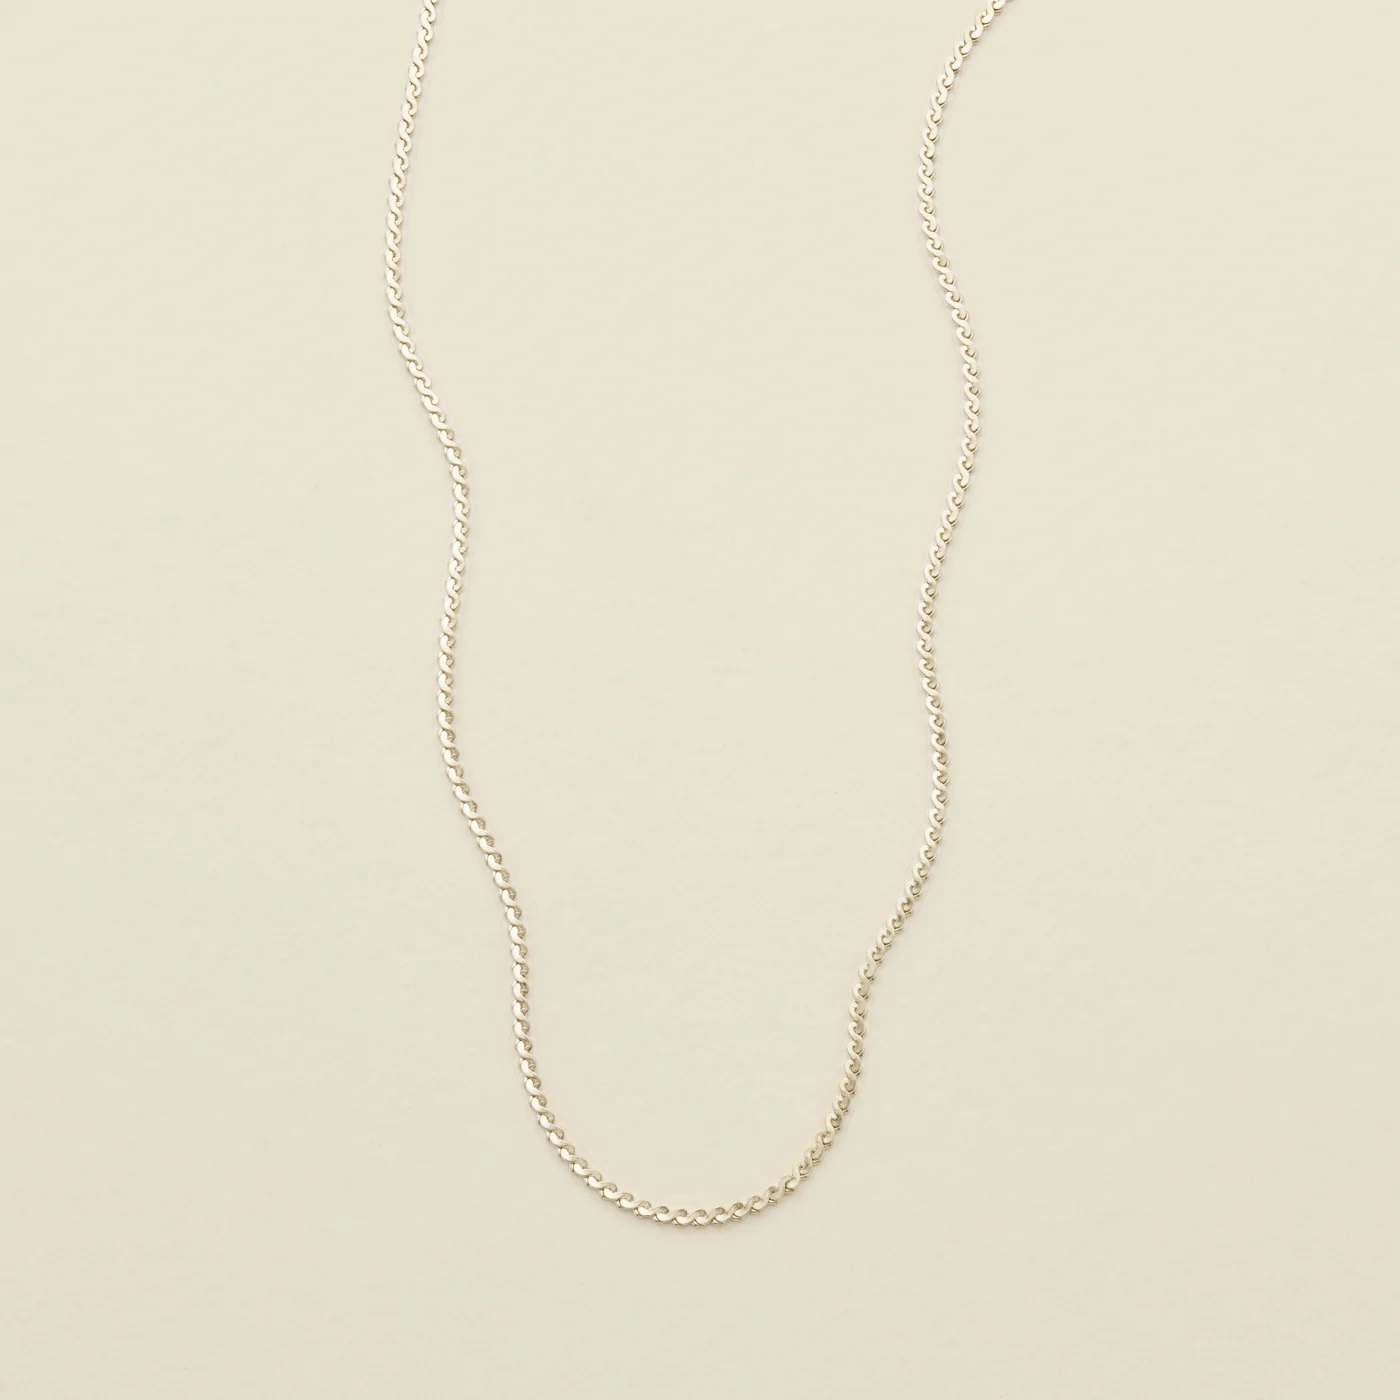 Serpentine Chain Necklace Silver Necklace